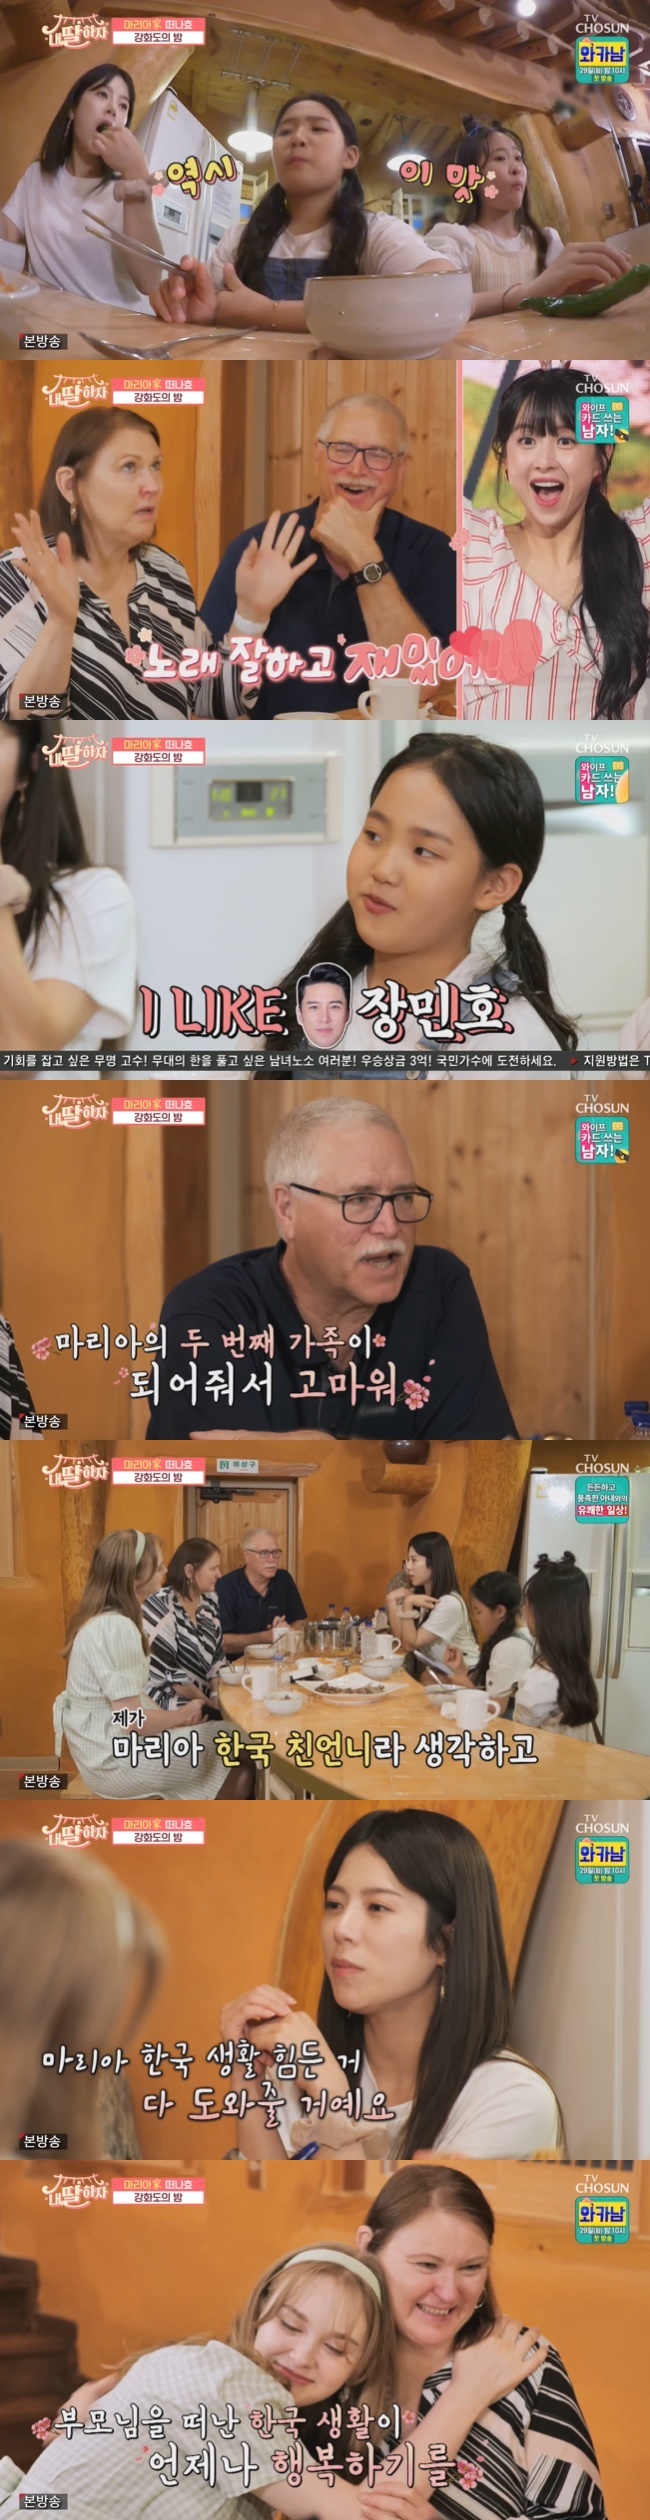 Yang ji-eun reassured Mary parents who were worried about their daughters life in Korea.On June 25, the TV Chosun My Daughters Hazard, Yang ji-eun made memories in Mary Family, Kim Da-hyun, Kim Taeyeon and Ganghwa Island.Yang ji-eun, who proposed a trip to Ganghwa Island to Marys parents who visited Korea, did his best to present a special day from the tidal flat experience to the black pork meat bowl that was airlifted from Jeju Island.At that time, Kim Da-hyun and Kim Taeyeon acted as if they were Marys fans and presented a song with a cute charm with a song called Dingbee.Kim Taeyeon marveled at Marys parents, saying, Ive never seen a foreigner.Mary said, My sister is a foreigner, but Kim Taeyeon laughed when she said, My sister is a Korean person.Marys parents, who went into the room to avoid the rain, were happy to see Kim Da-hyun and Kim Taeyeon eating with their lovely eyes.Marys mother said she was a favorite member of the group, Singing is good and fun. She also praised the boom, saying, Singing glasses and fun people, always looking for something.Kim Taeyeon confessed shyly to Son Hart, saying I Like Jang Min Ho.Marys mother was impressed by the lullaby she had called Mary when she was a child when she asked to listen to the song.In the warm hospitality of Yang ji-eun, Kim Da-hyun and Kim Taeyeon, Mary Dad expressed his heart that Thank you for being Marys second family.Dont worry, I think Im Mary Koreas sister and Ill help you with anything you can do while youre in Korea, Yang Ji-eun promised.Do Kyung-wan, who saw this, sympathized with Marys parents, saying, Yang ji-eun is deeply sick, I know what parents want most.